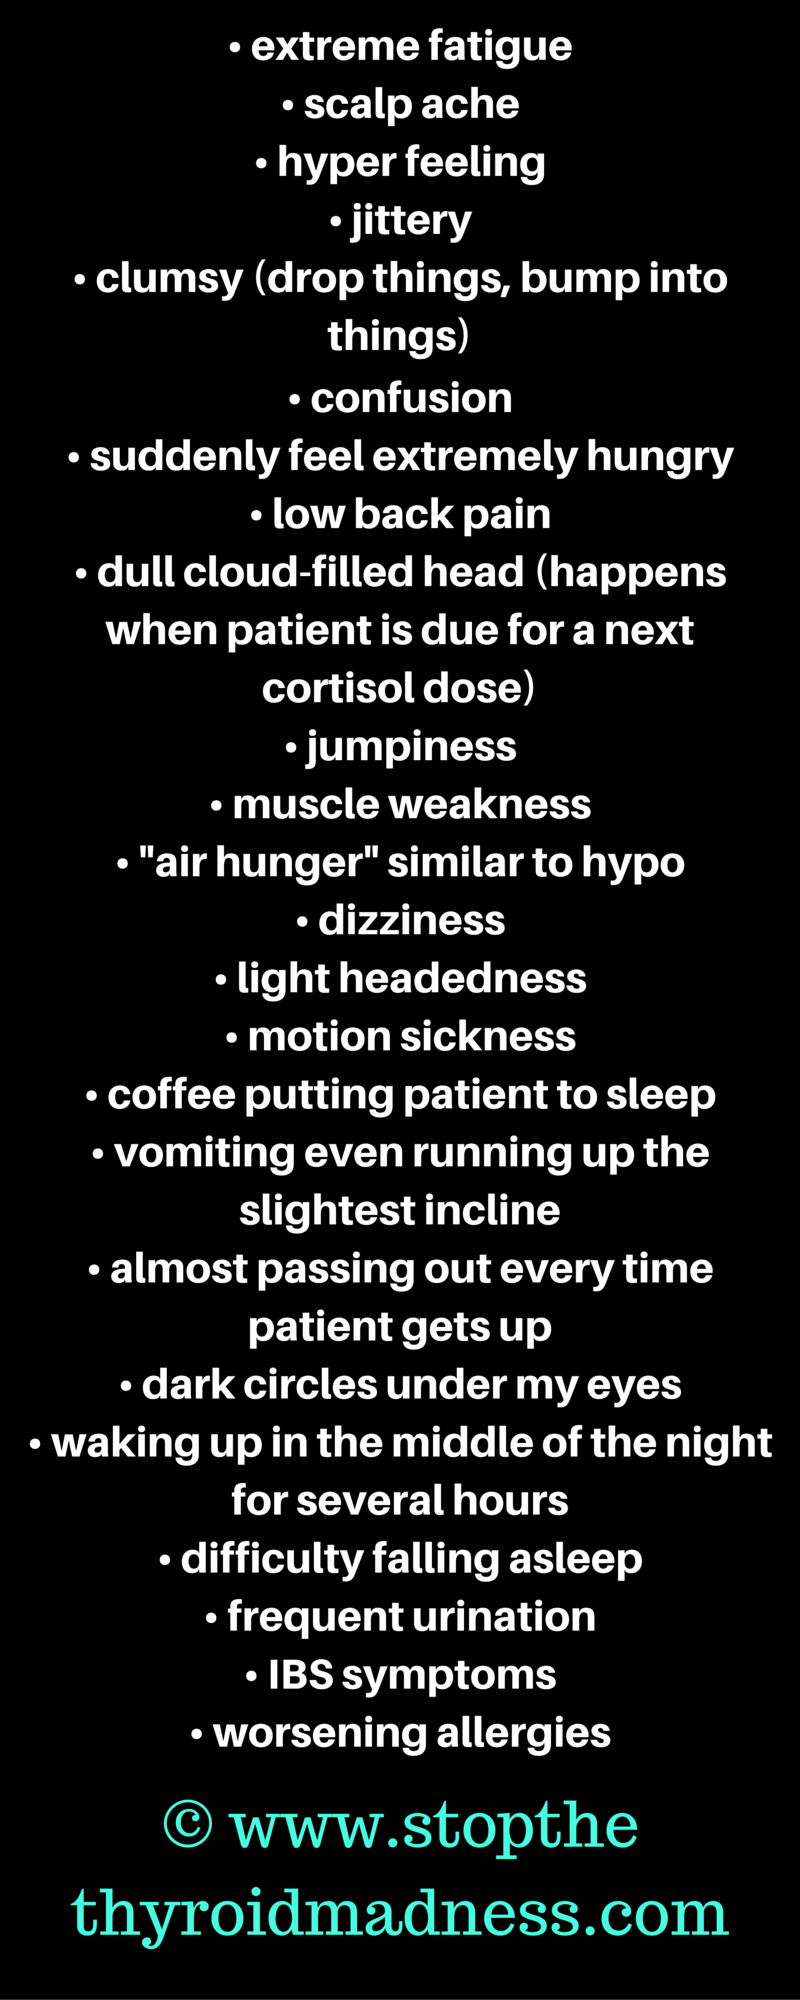 https://stopthethyroidmadness.com/images/STTM-graphic-Adrenal-symptoms-part-two-BLACK-BACKGROUND.png